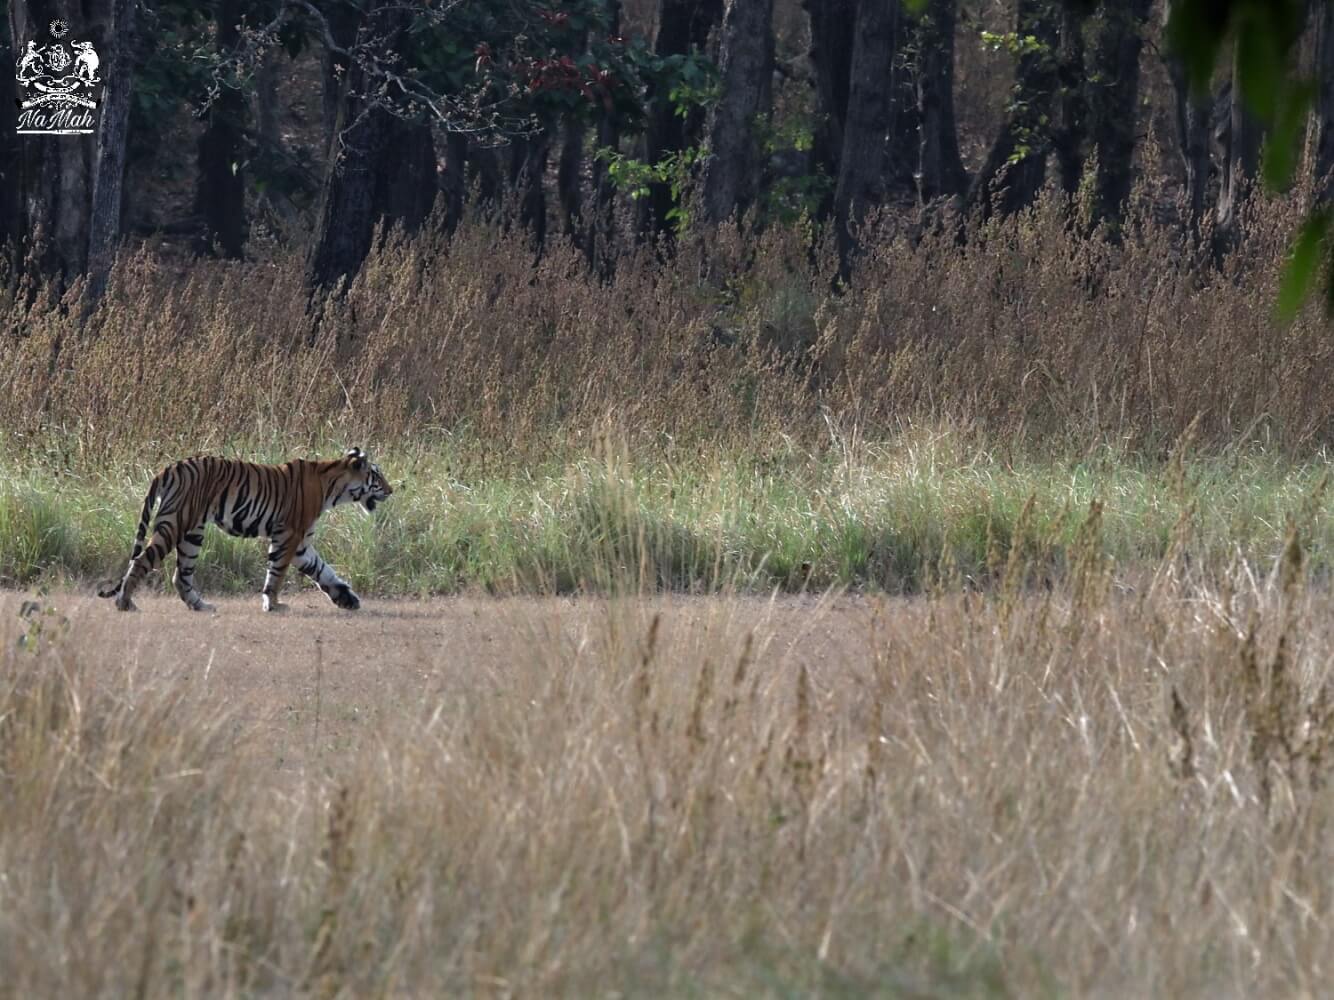 Tiger walking in its home forest, habitat photograph
